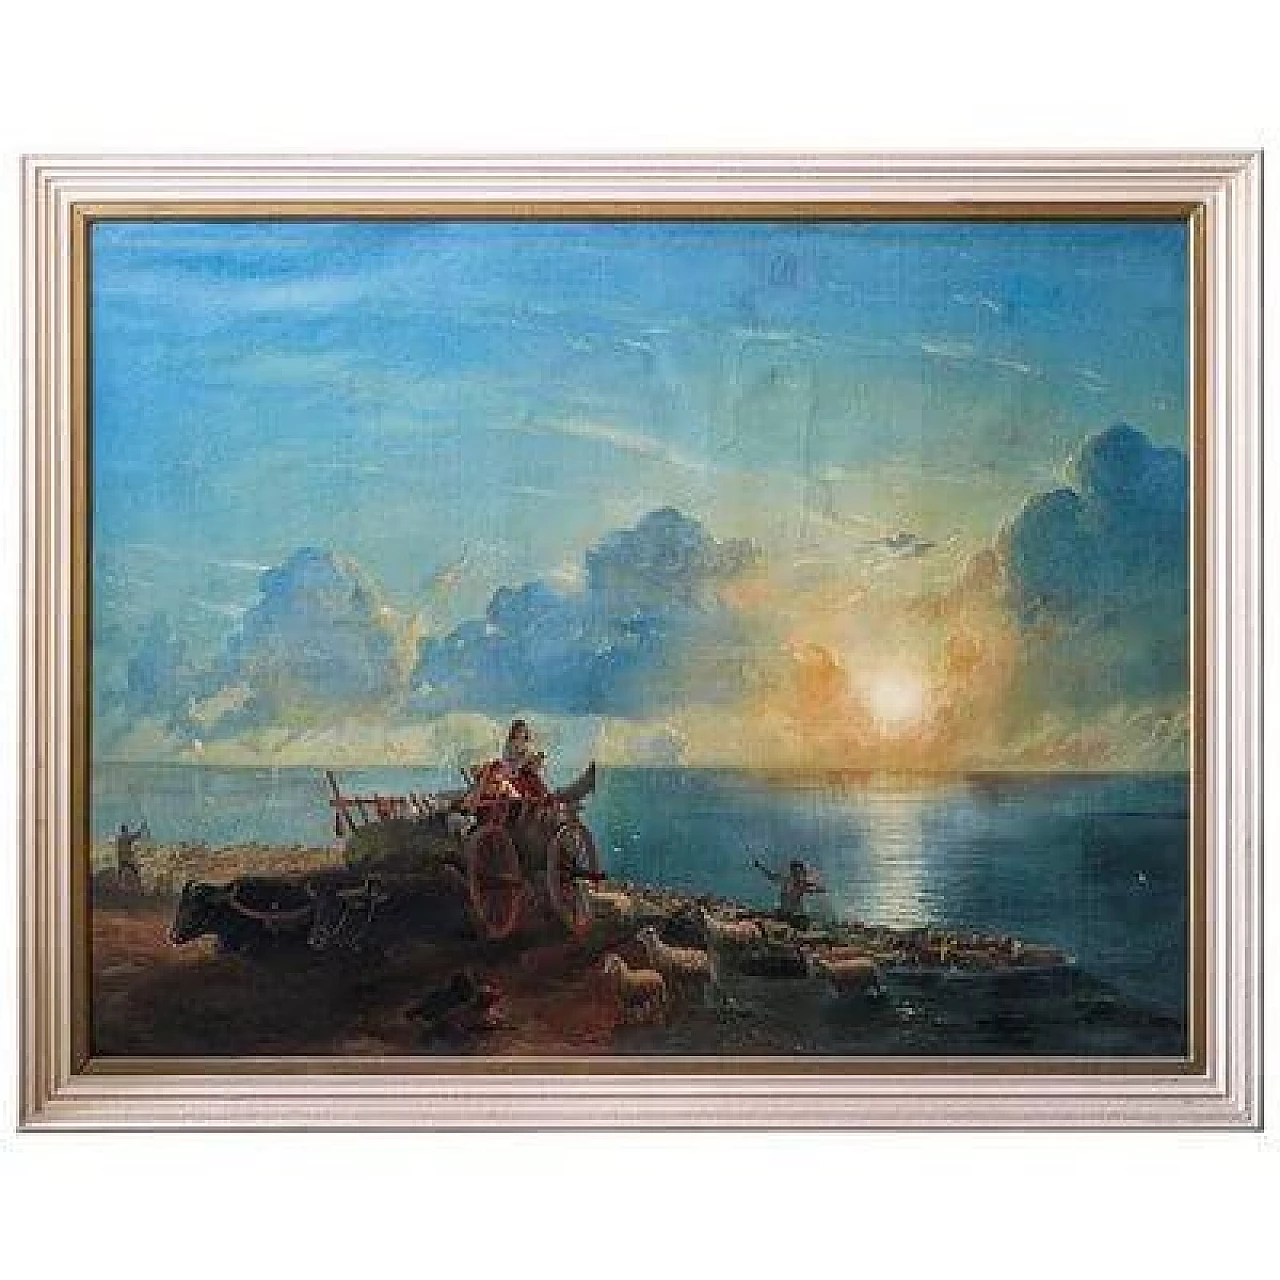 Sunset with animals and characters, oil painting on canvas, 19th century 1